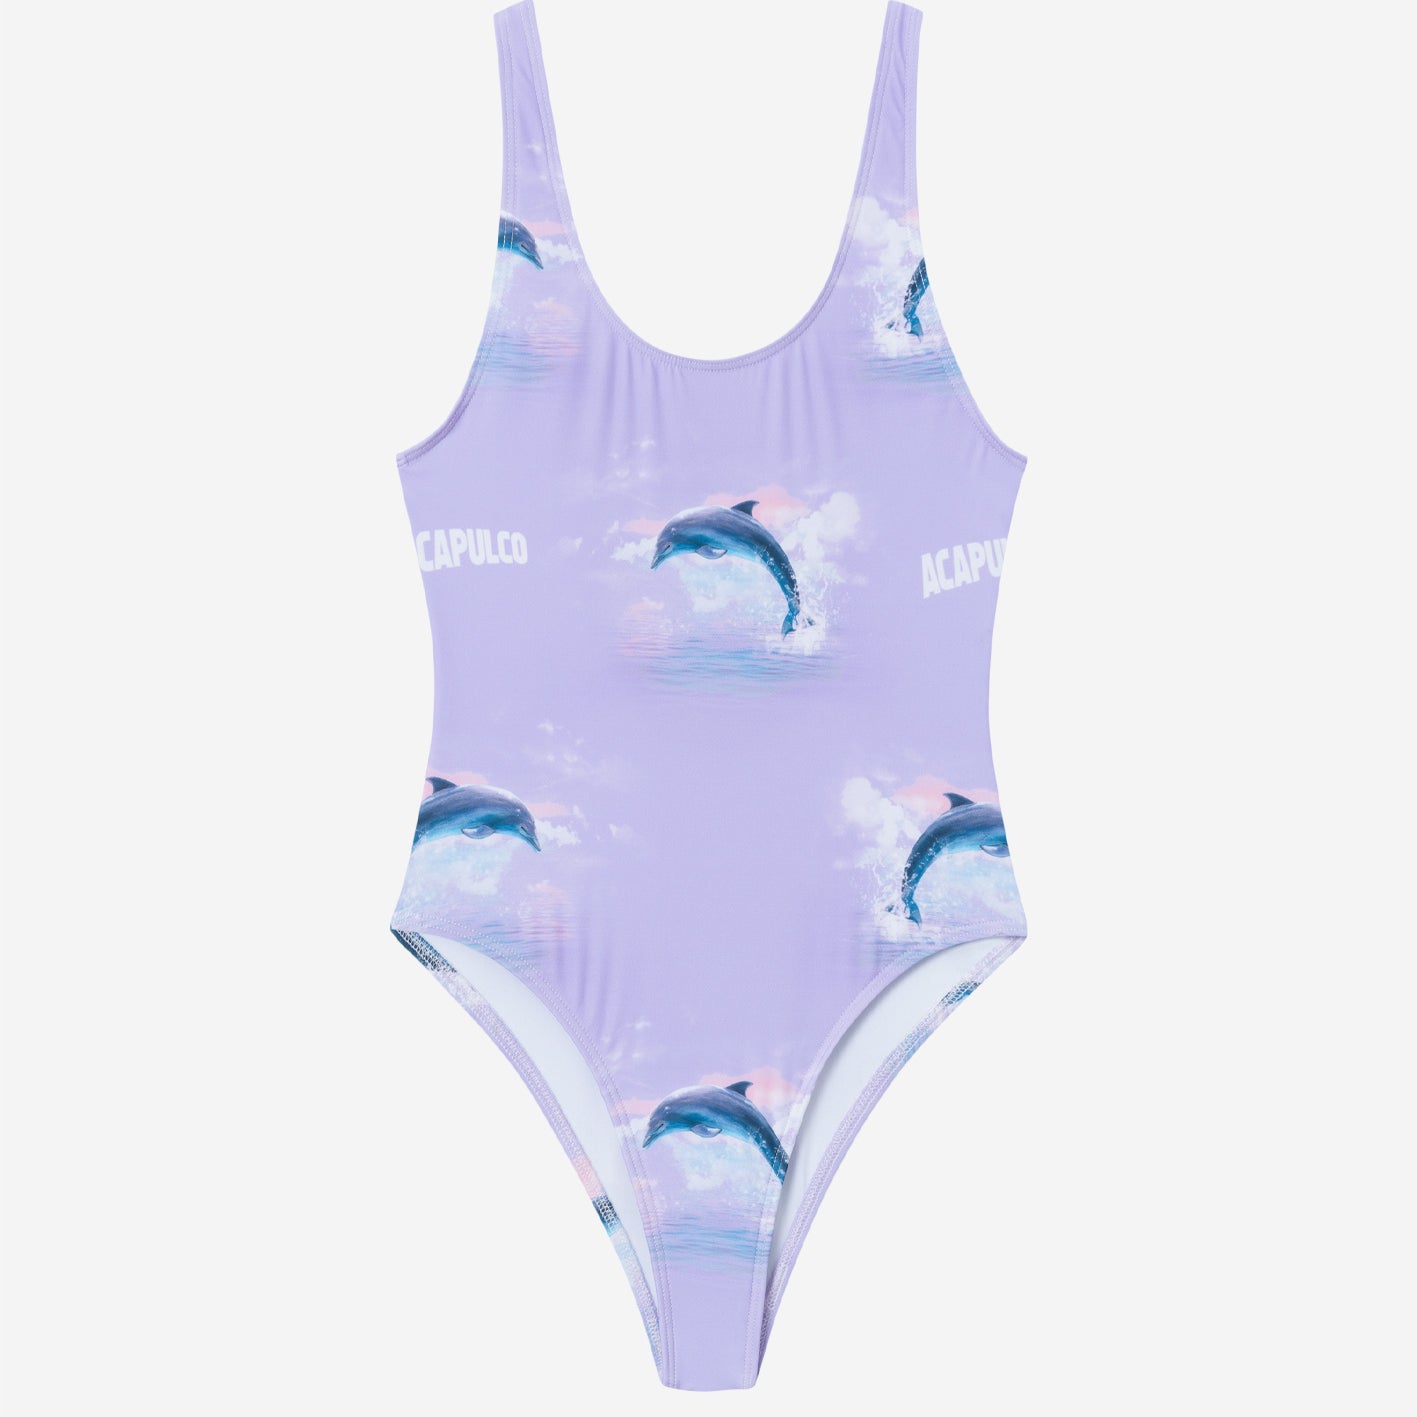 Purple swimsuit with dolphins and text print